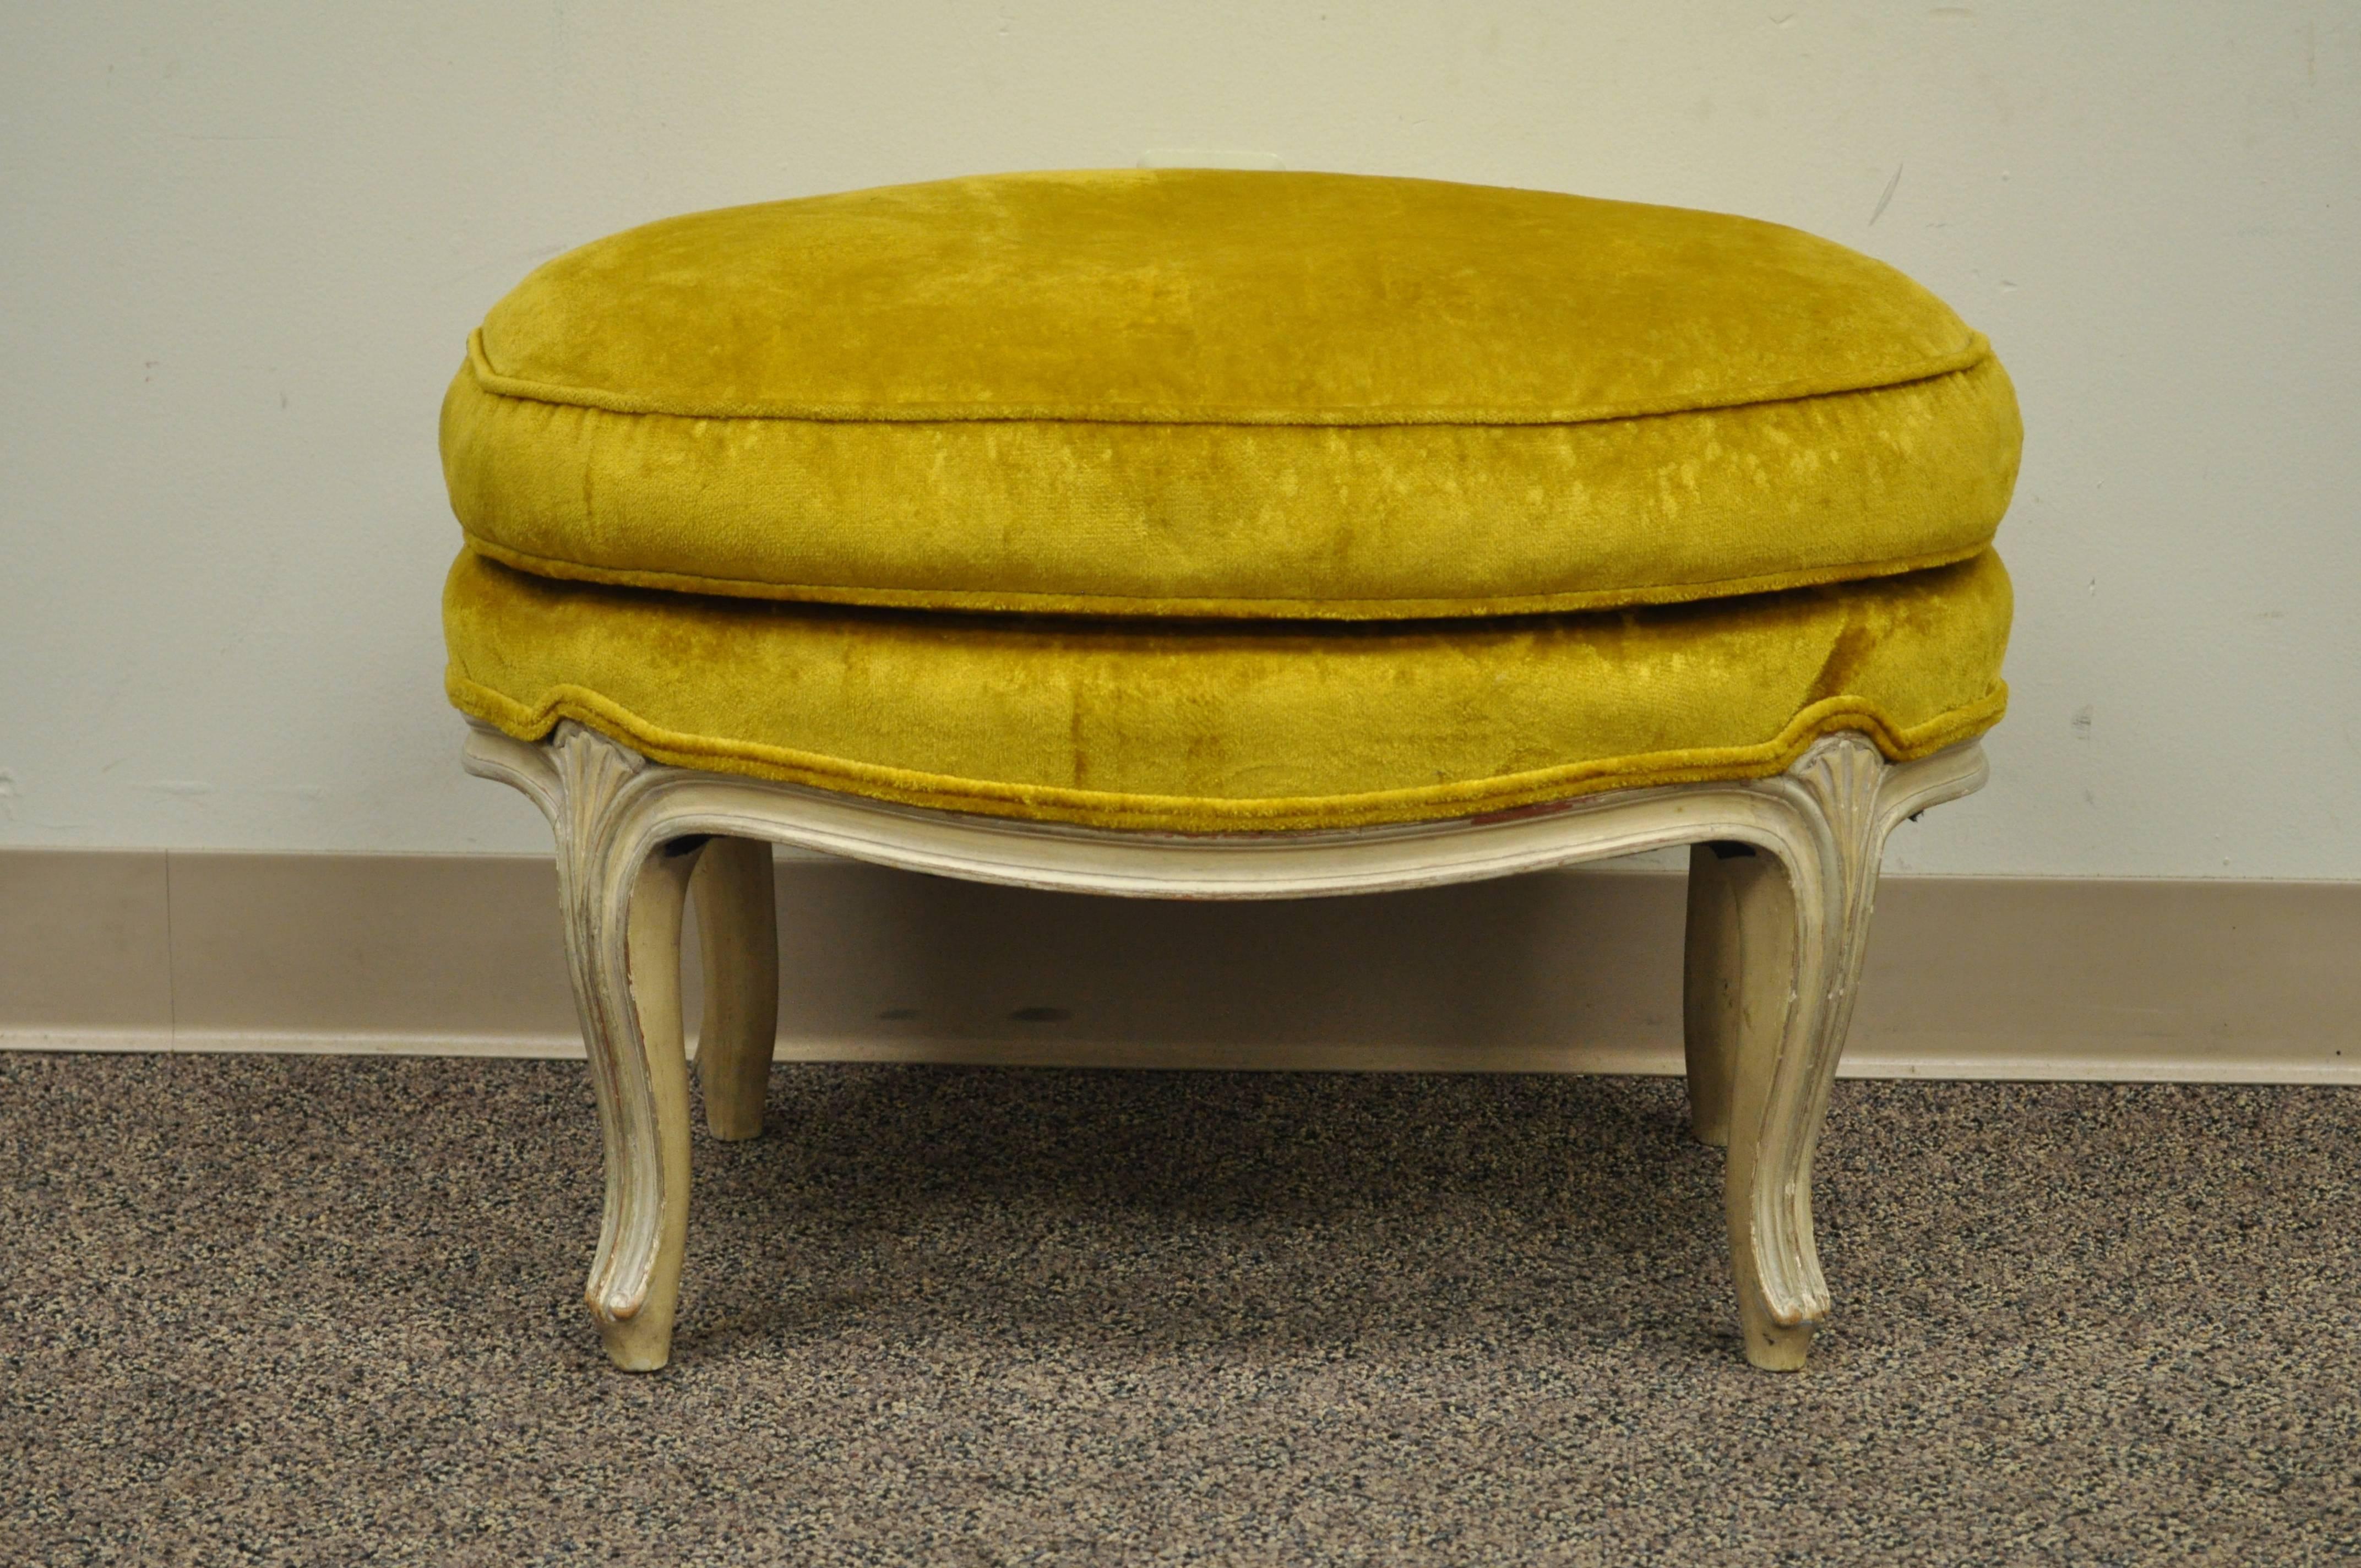 Vintage French Louis XV Style cream painted and gold gilt overstuffed oval shaped ottoman. Item features shapely cabriole legs and shell carved knees.